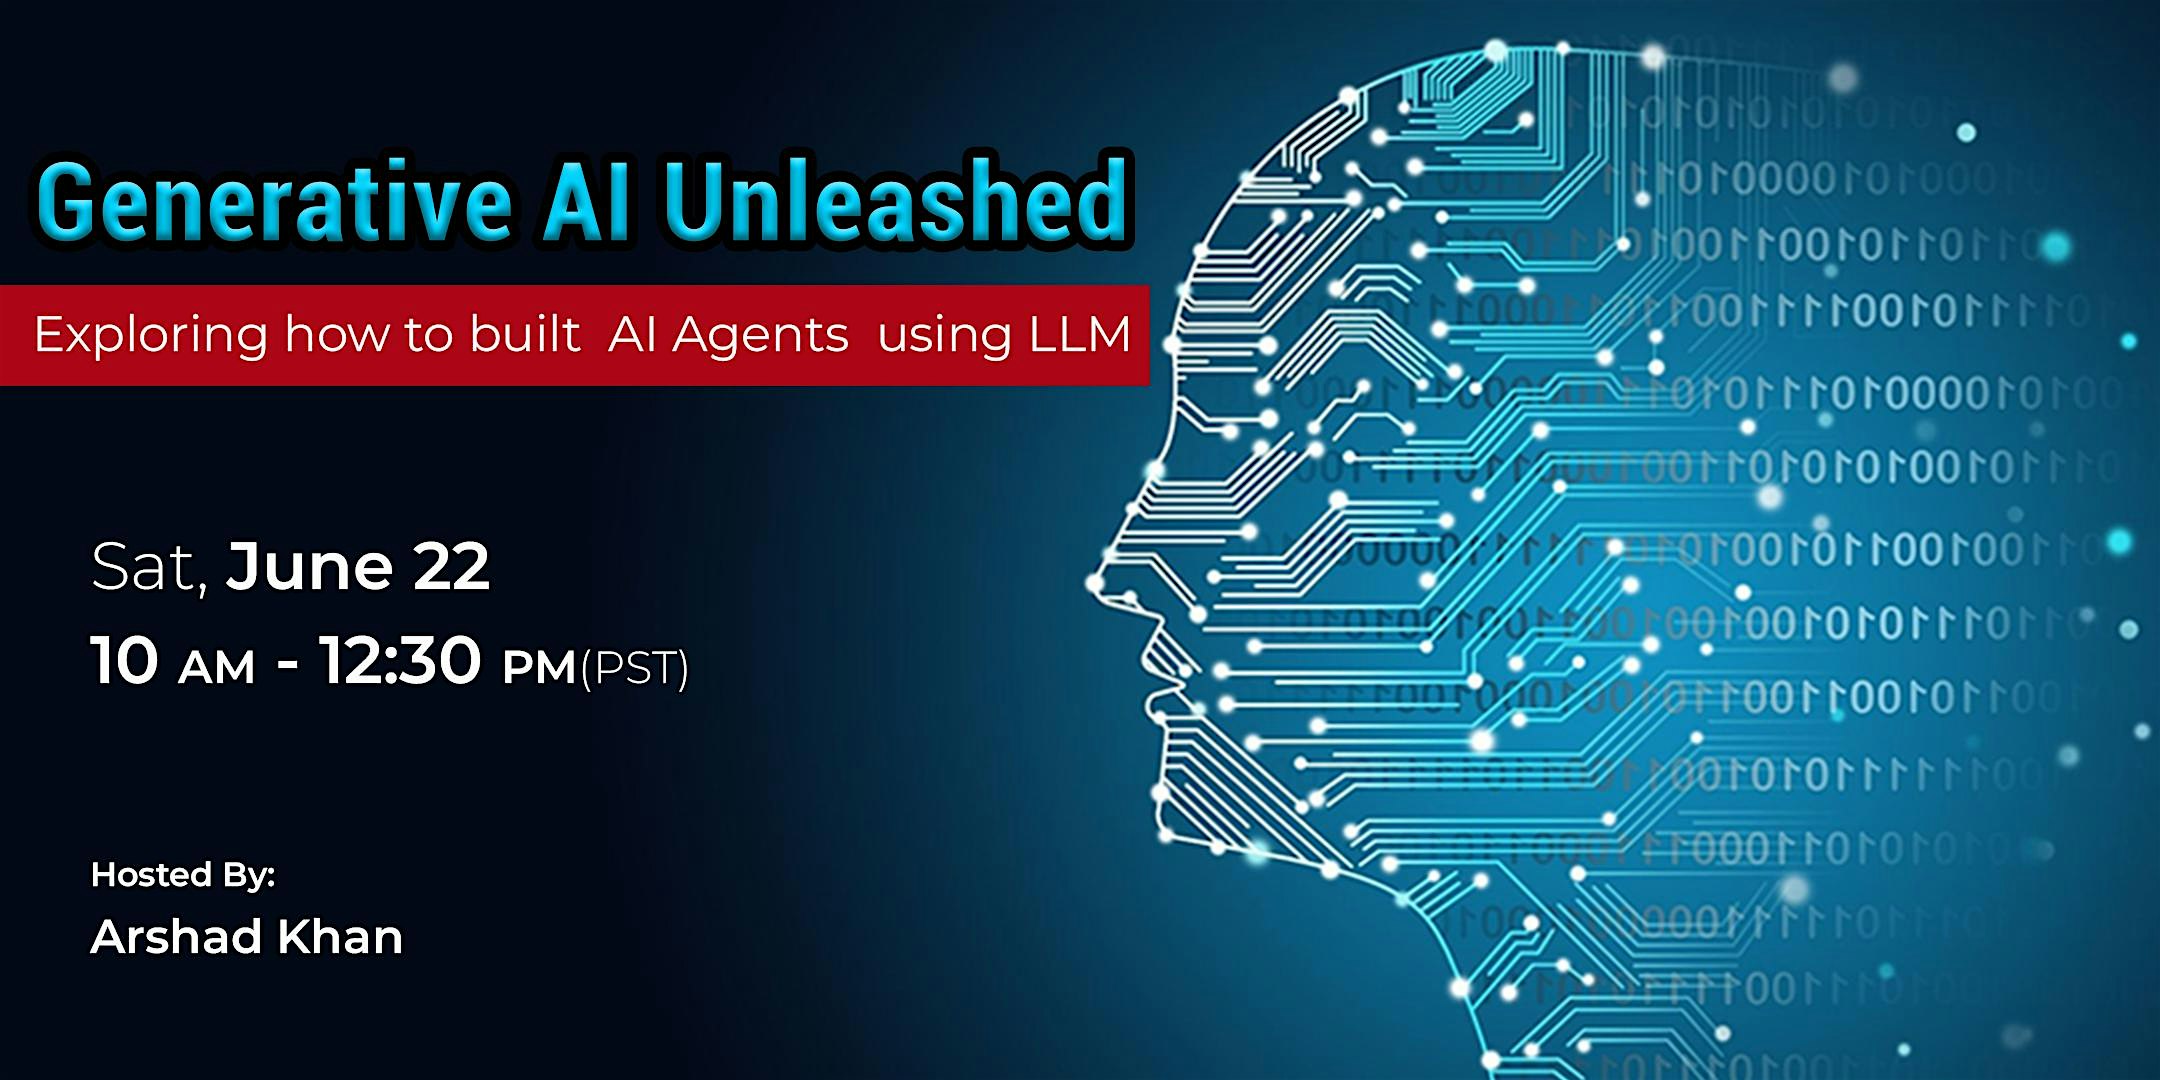 "Generative AI Unleashed: Exploring how to build AI Agents using LLM,"